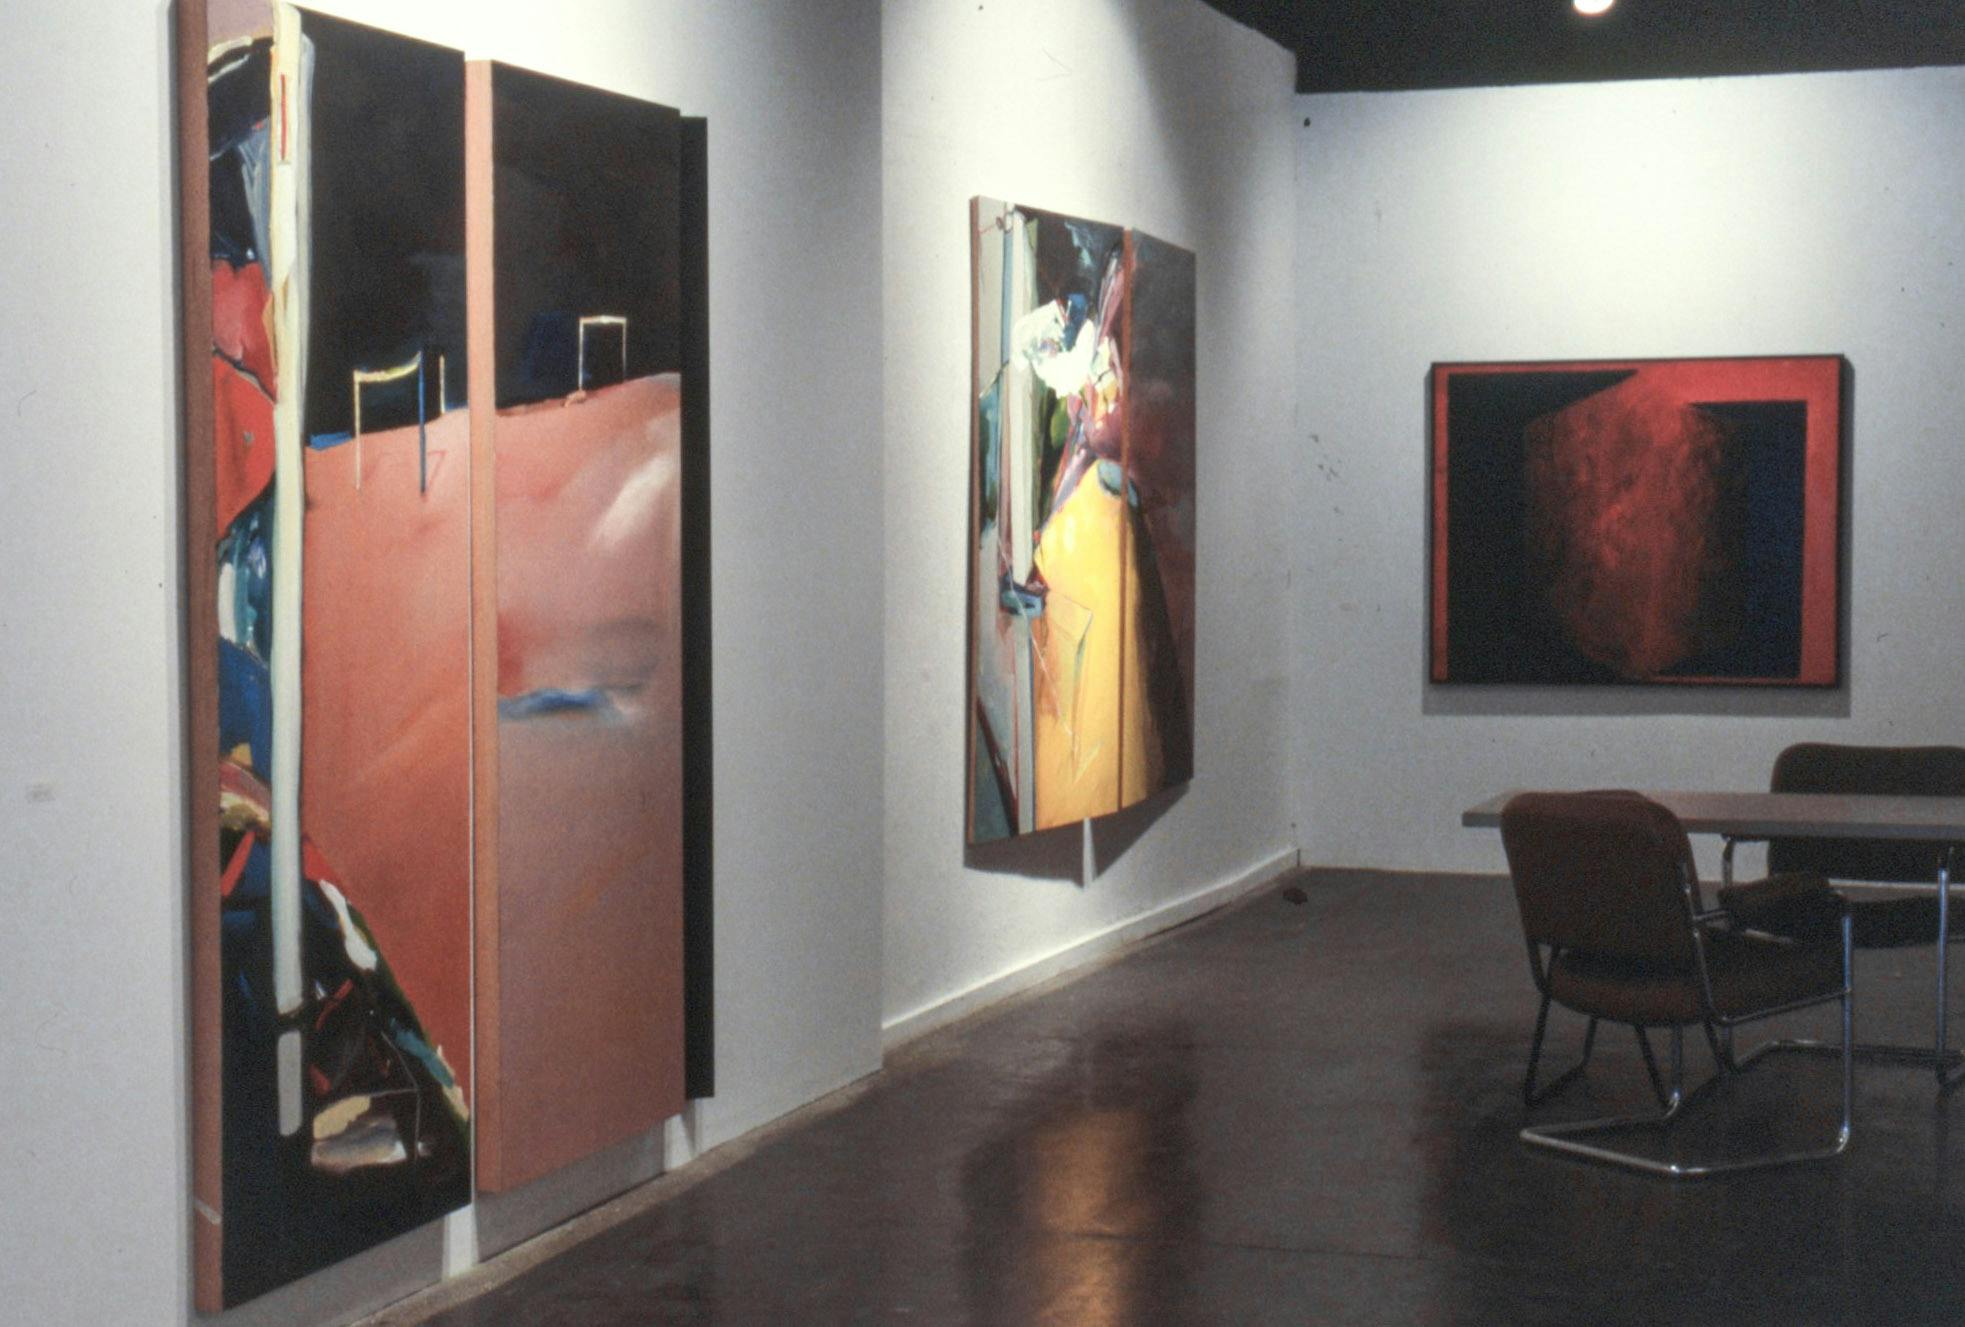 3 large paintings in a gallery. One is red and black in a frame. The other 2 paintings are bright and colourful, composed of 3 different canvases. On the floor, there is a table and 2 chairs visible.